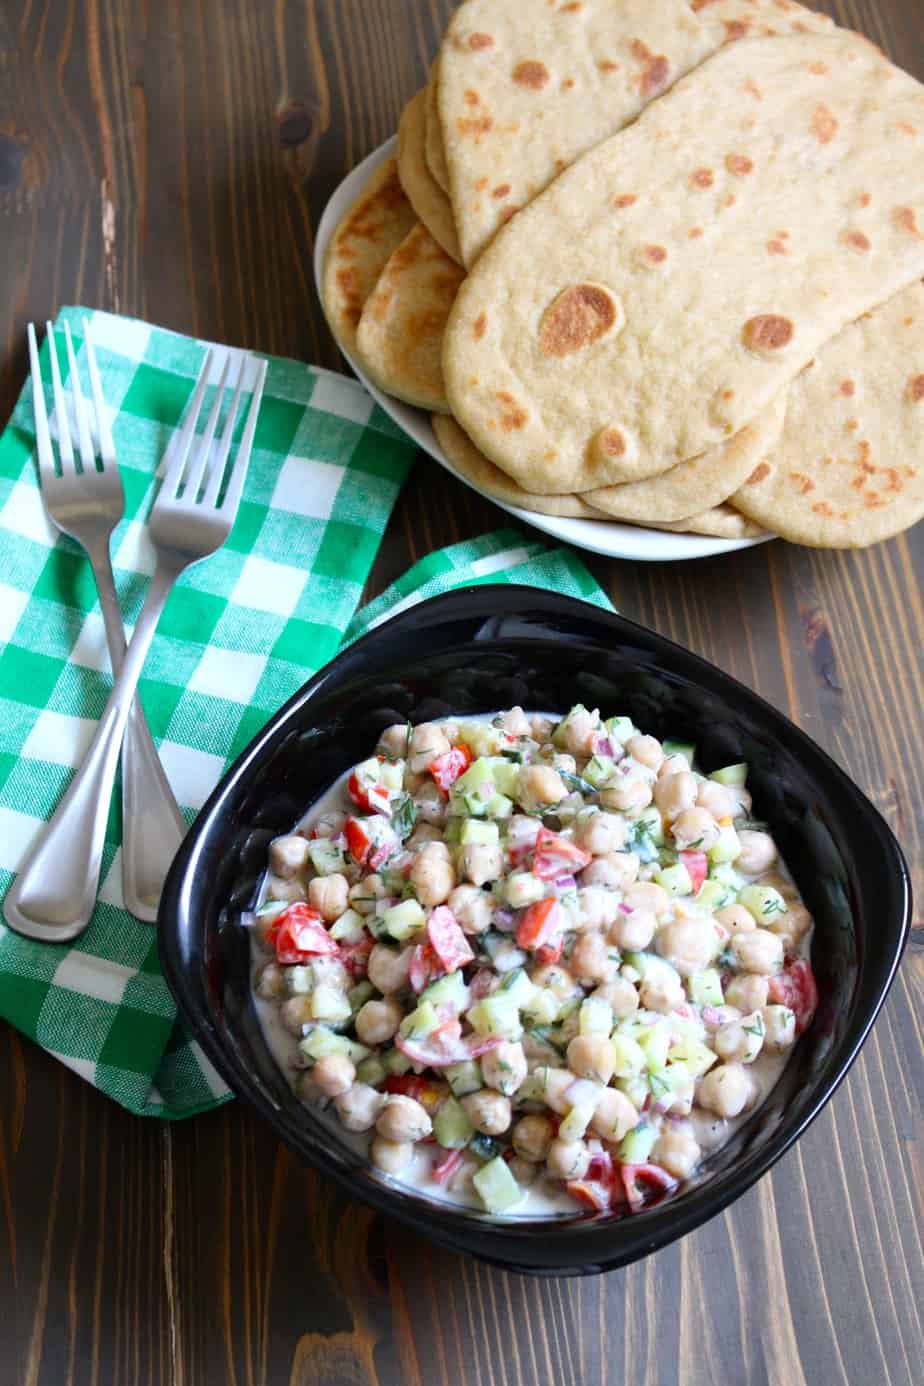 Chickpea tzatziki salad in a black bowl beside a plate of naan